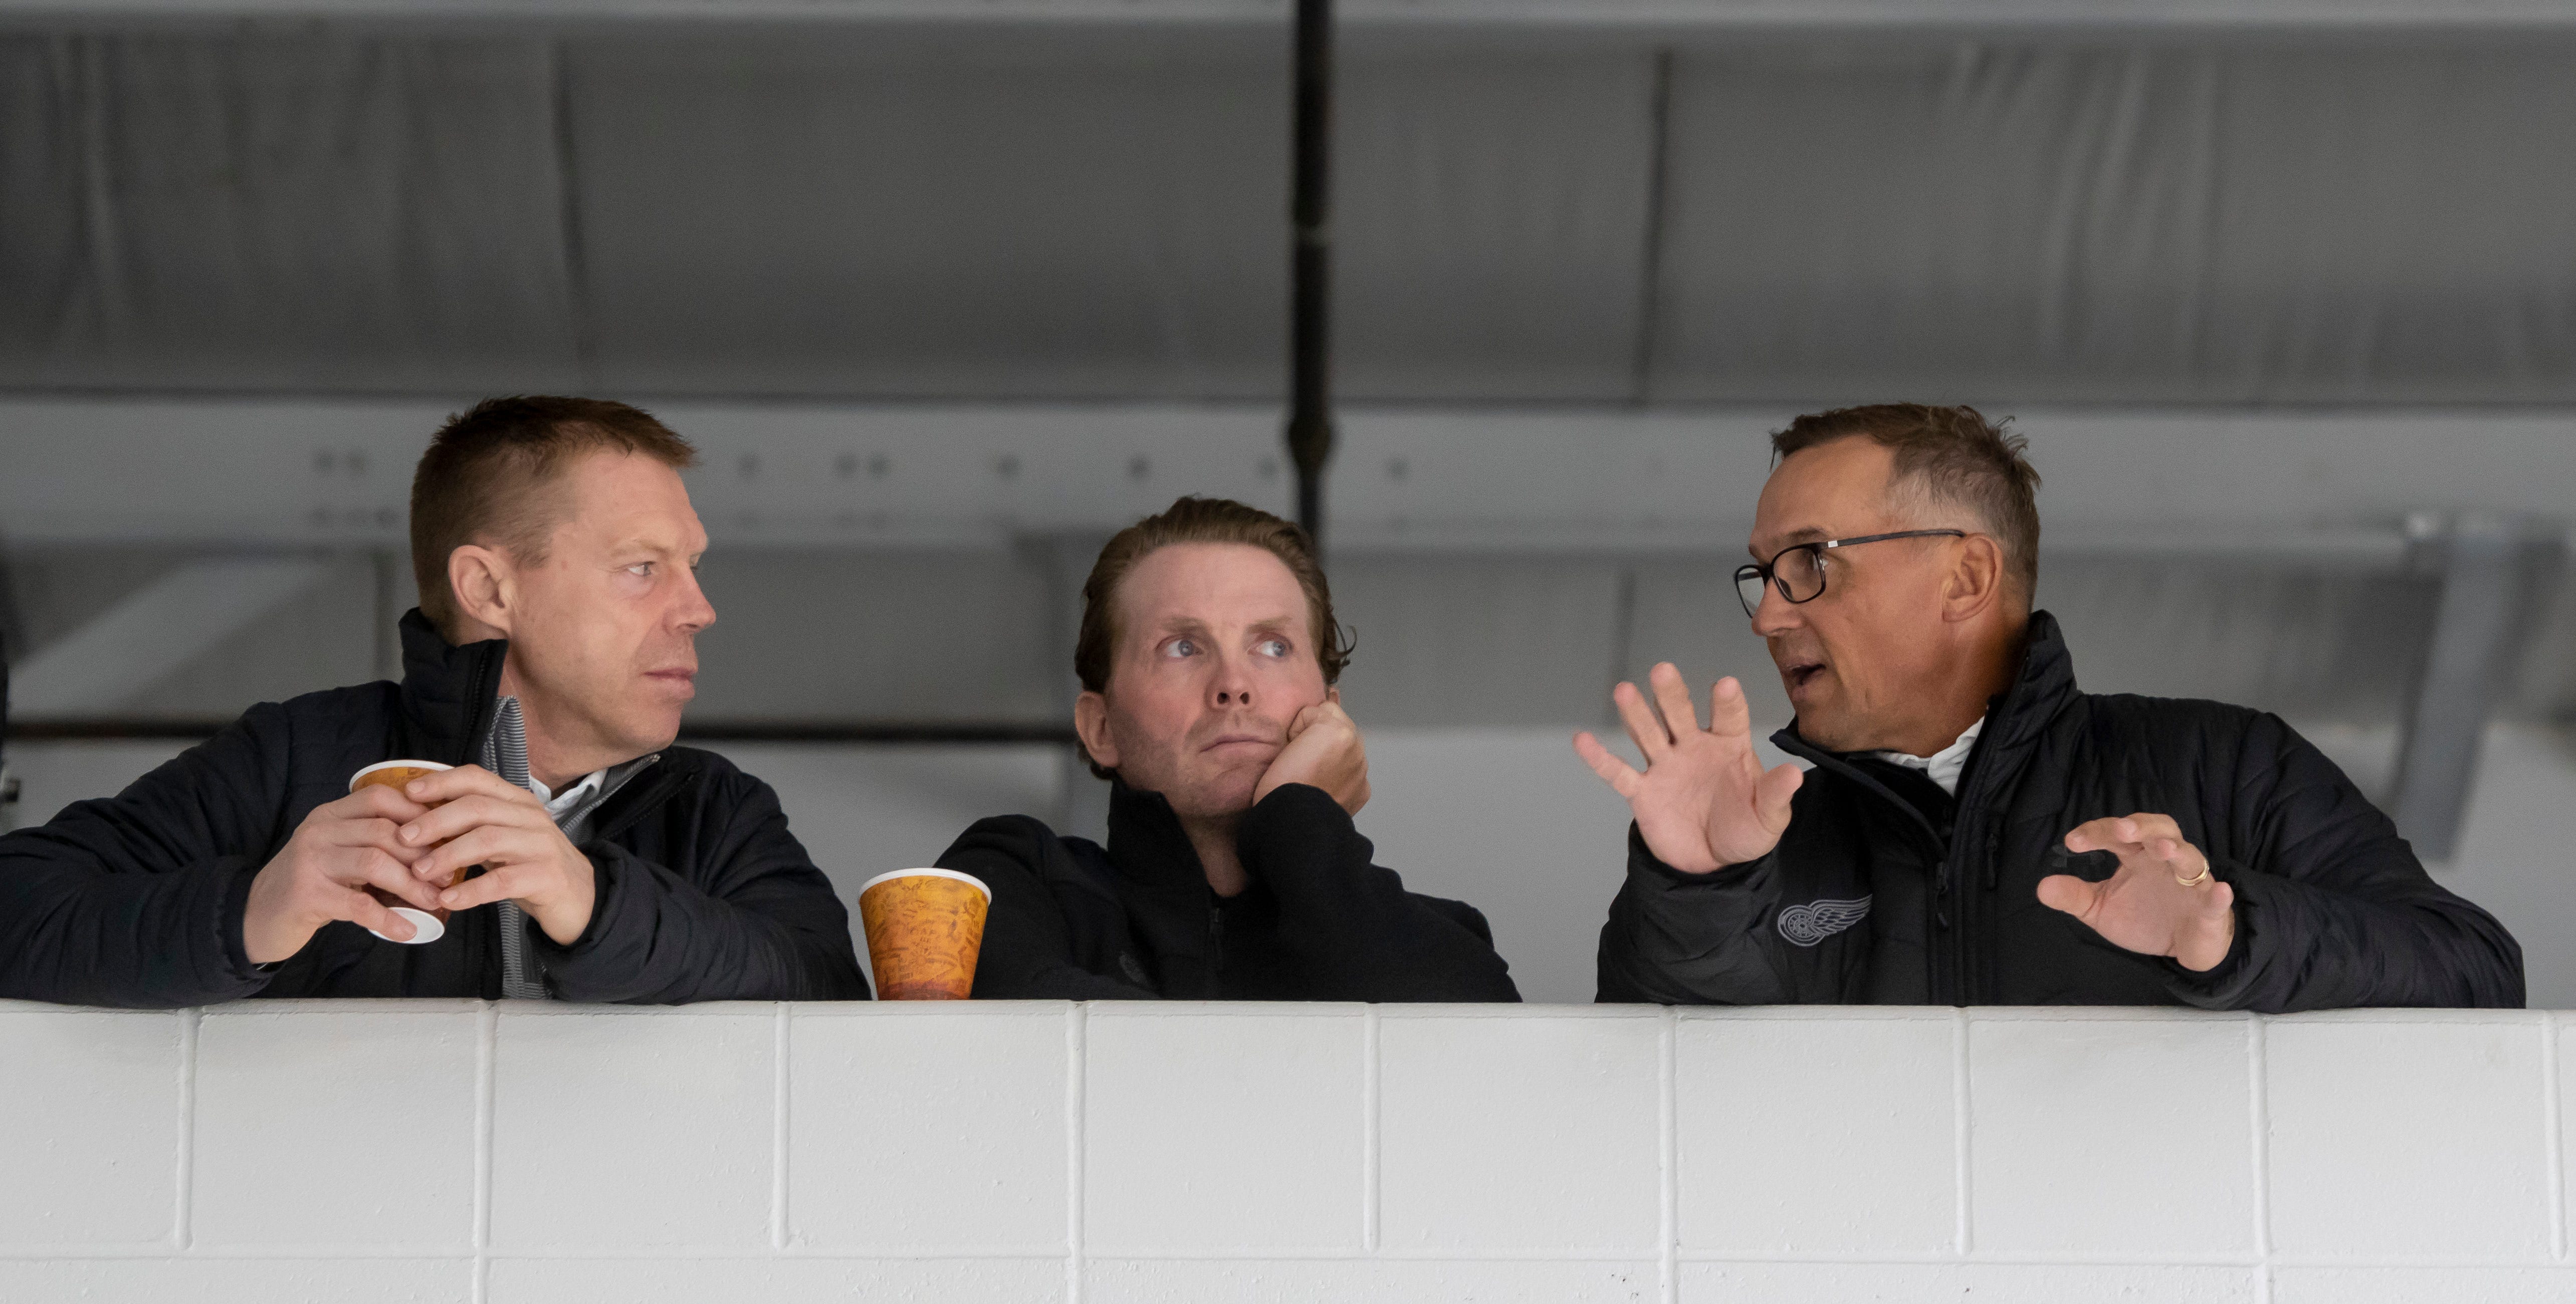 (From left) Director of Amateur Scouting Kris Draper, Assistant Director of Player Development Dan Cleary, and General Manager Steve Yzerman chat during the Red Wings training camp at Centre Ice Arena, in Traverse City.  All three were former players.